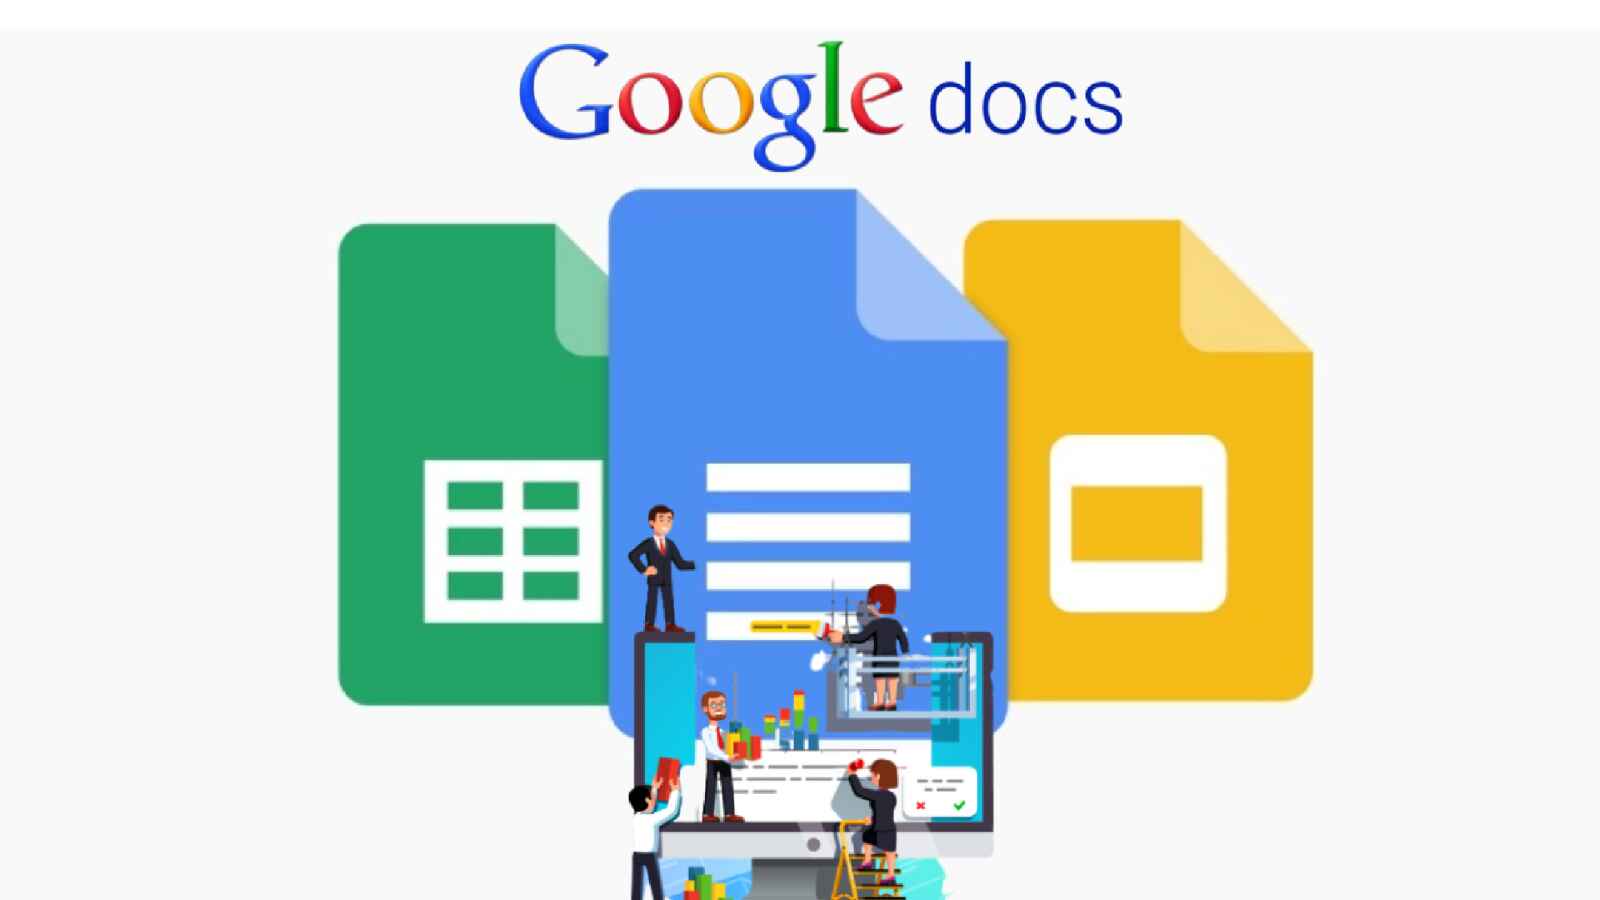 How To Download A Image From Google Docs